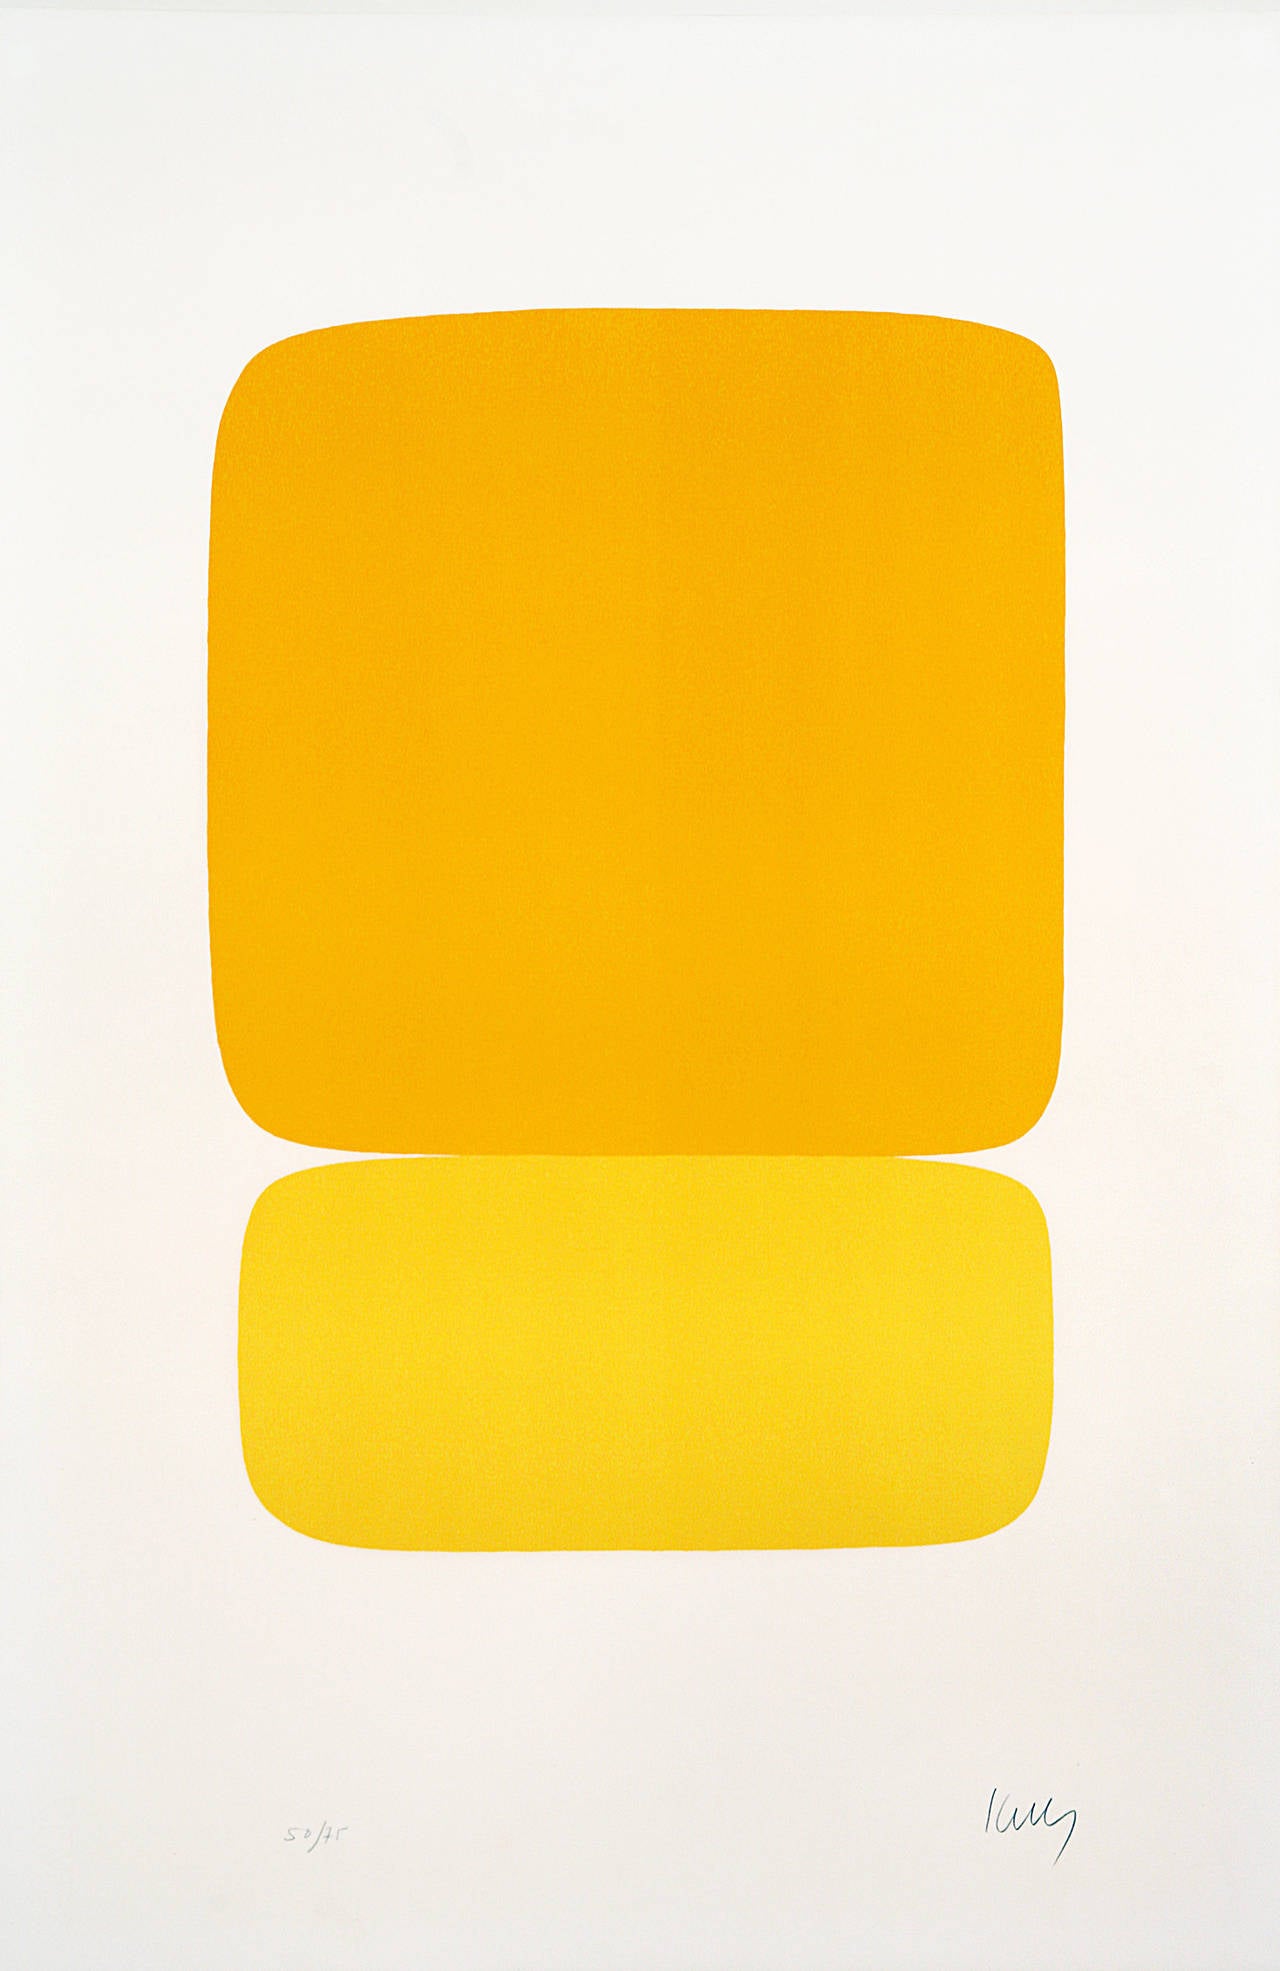 Lithograph "Jaune sur Jaune" (Yellow over Yellow) 1964-1965, by Ellsworth Kelly, hand signed and numbered on left (50/75). Printed by Maeght, Levalliois-Perret; publisher Maeght Editeur, Paris. 
References:  Richard H. Axsom, "The Prints of